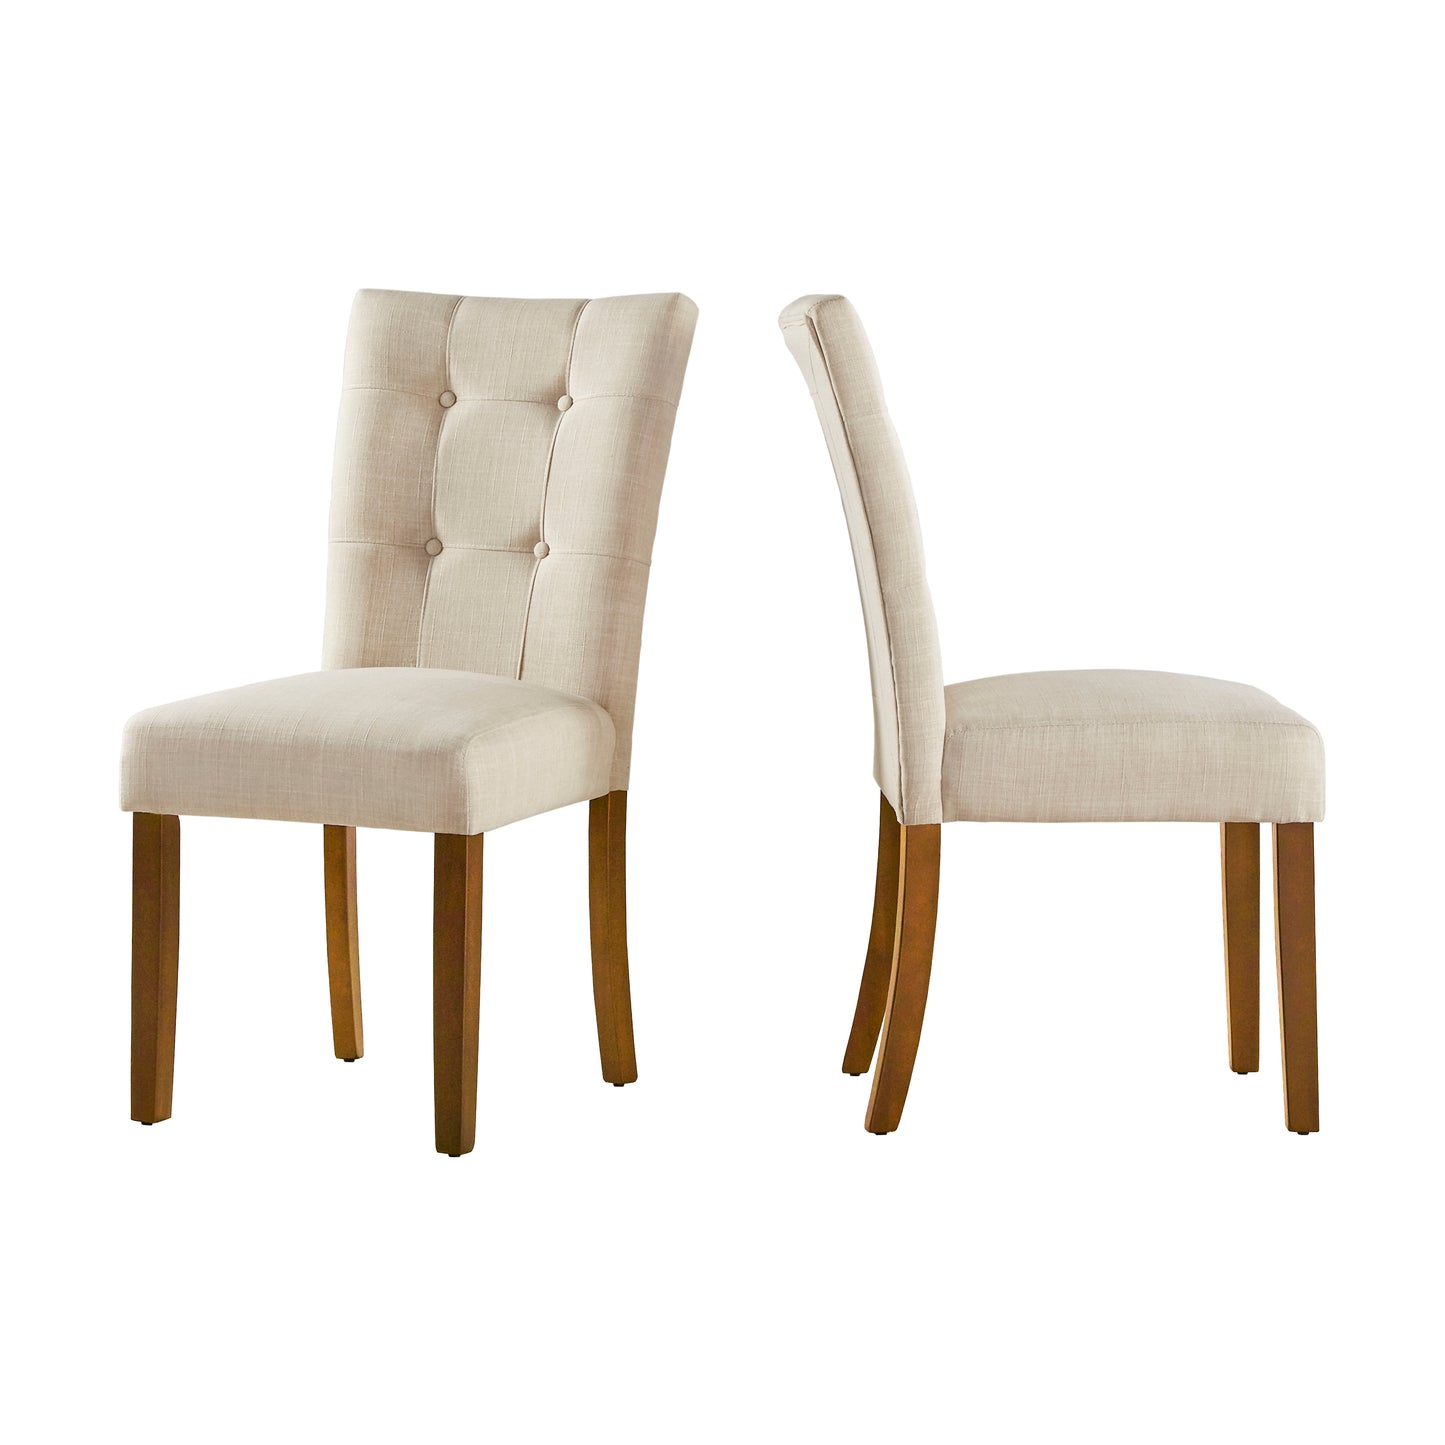 Cherry Finish Upholstered Dining Chairs (Set of 2) - Beige Linen